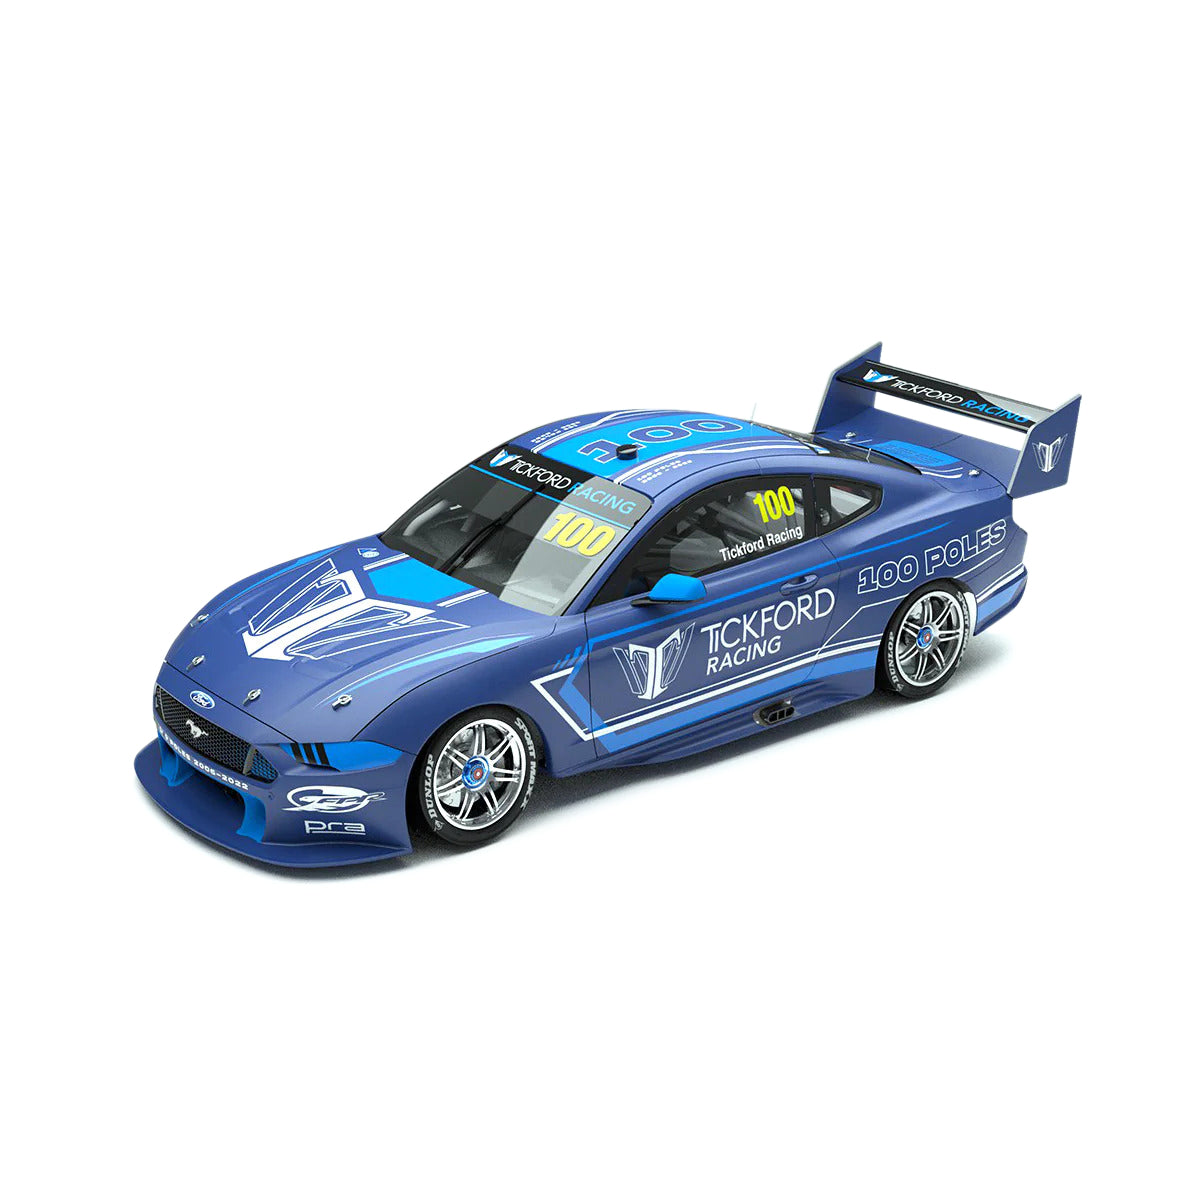 Ford Mustang GT Tickford Racing 100 Poles Celebration Livery